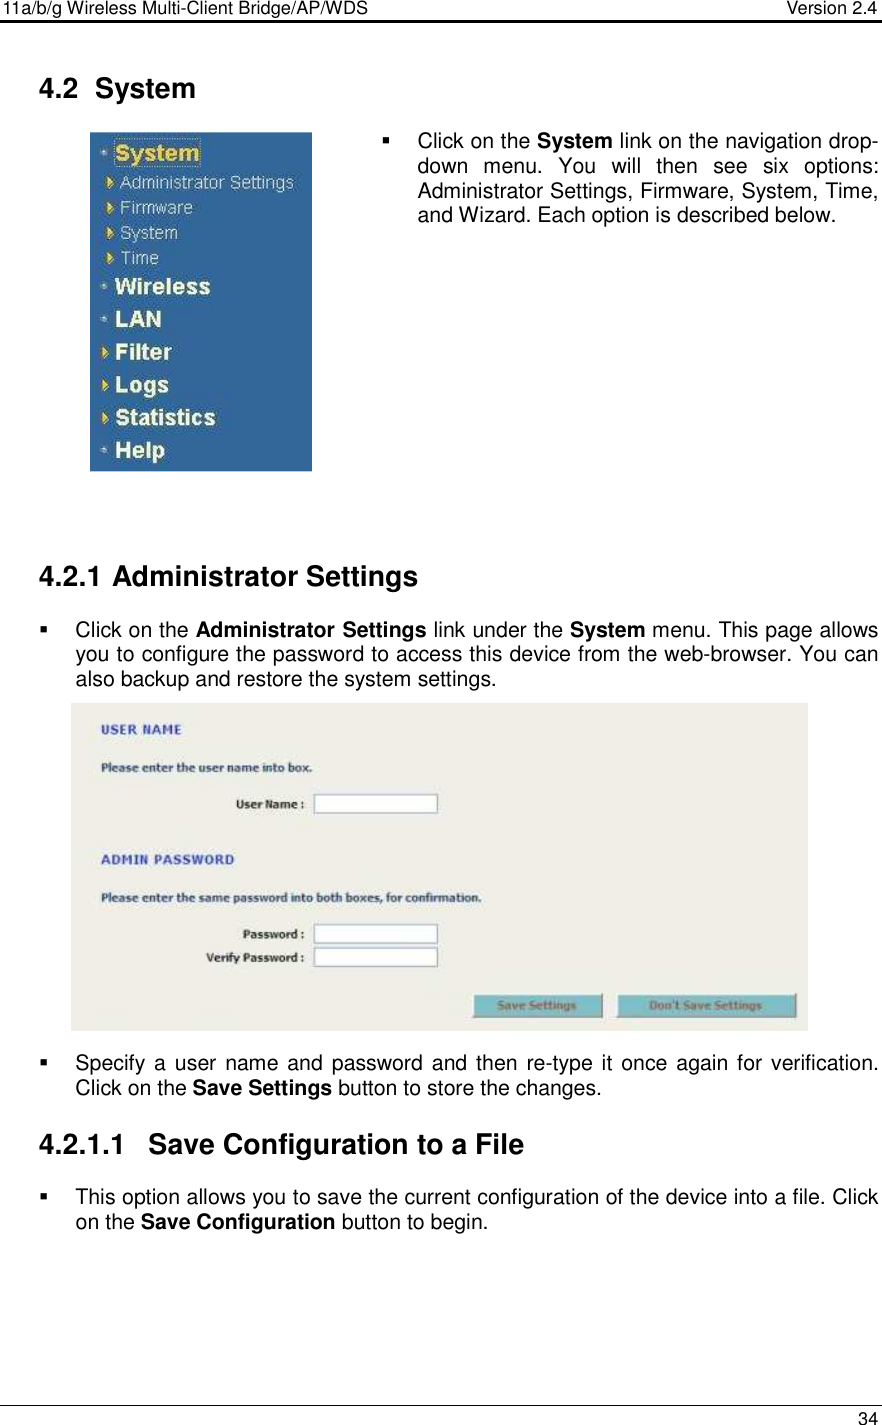 11a/b/g Wireless Multi-Client Bridge/AP/WDS                                  Version 2.4    34   4.2  System    Click on the System link on the navigation drop-down  menu.  You  will  then  see  six  options: Administrator Settings, Firmware, System, Time, and Wizard. Each option is described below.               4.2.1 Administrator Settings   Click on the Administrator Settings link under the System menu. This page allows you to configure the password to access this device from the web-browser. You can also backup and restore the system settings.                Specify a user name and password and then re-type it  once again for verification. Click on the Save Settings button to store the changes.   4.2.1.1  Save Configuration to a File   This option allows you to save the current configuration of the device into a file. Click on the Save Configuration button to begin.         